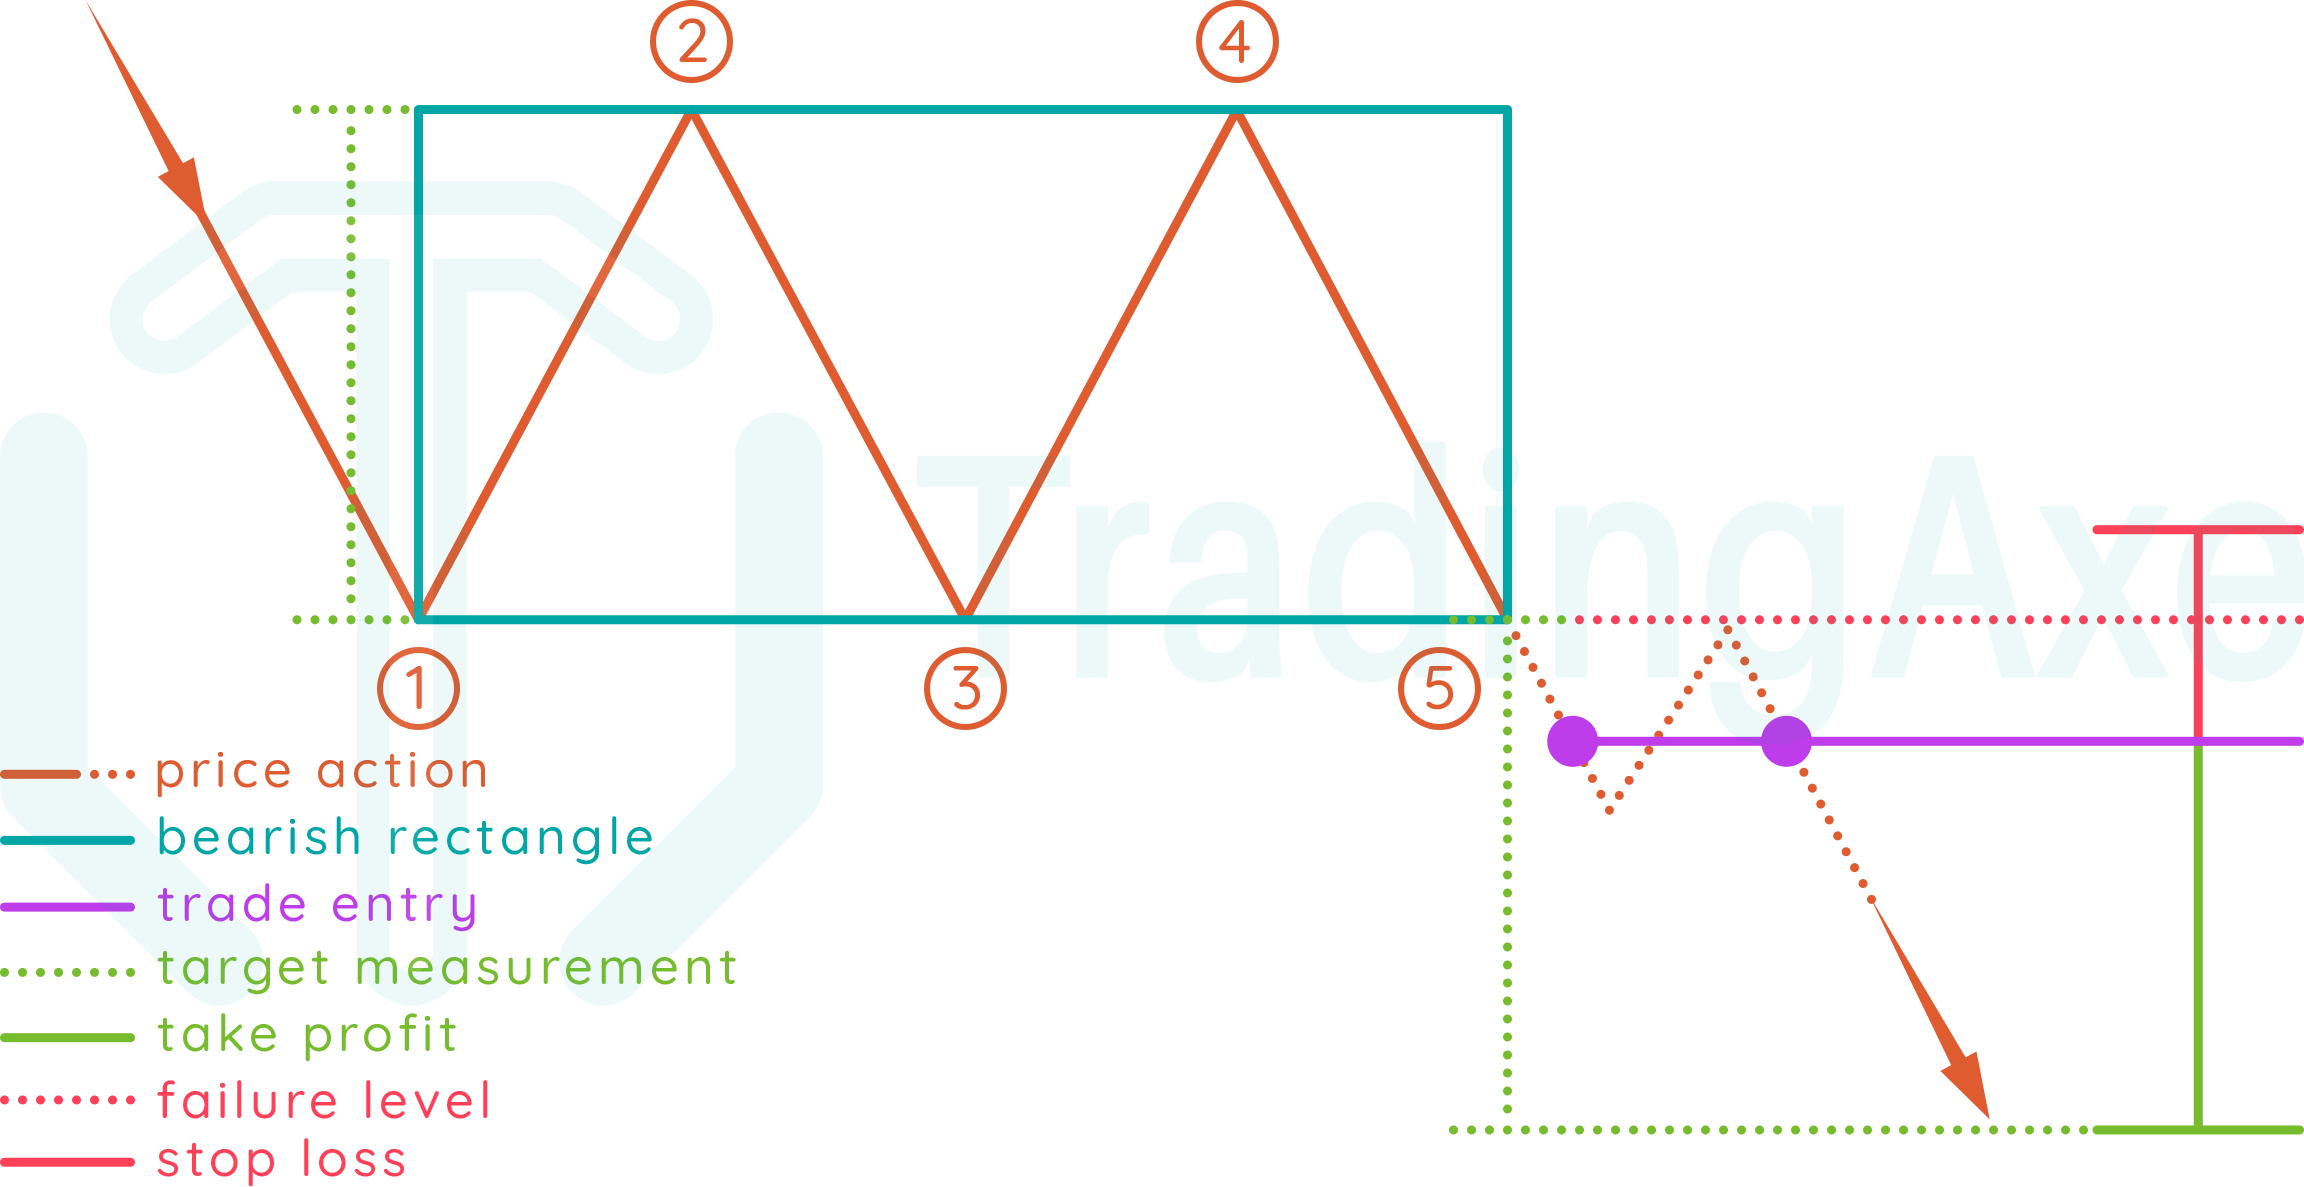 Illustration of how to trade bearish rectangle chart pattern